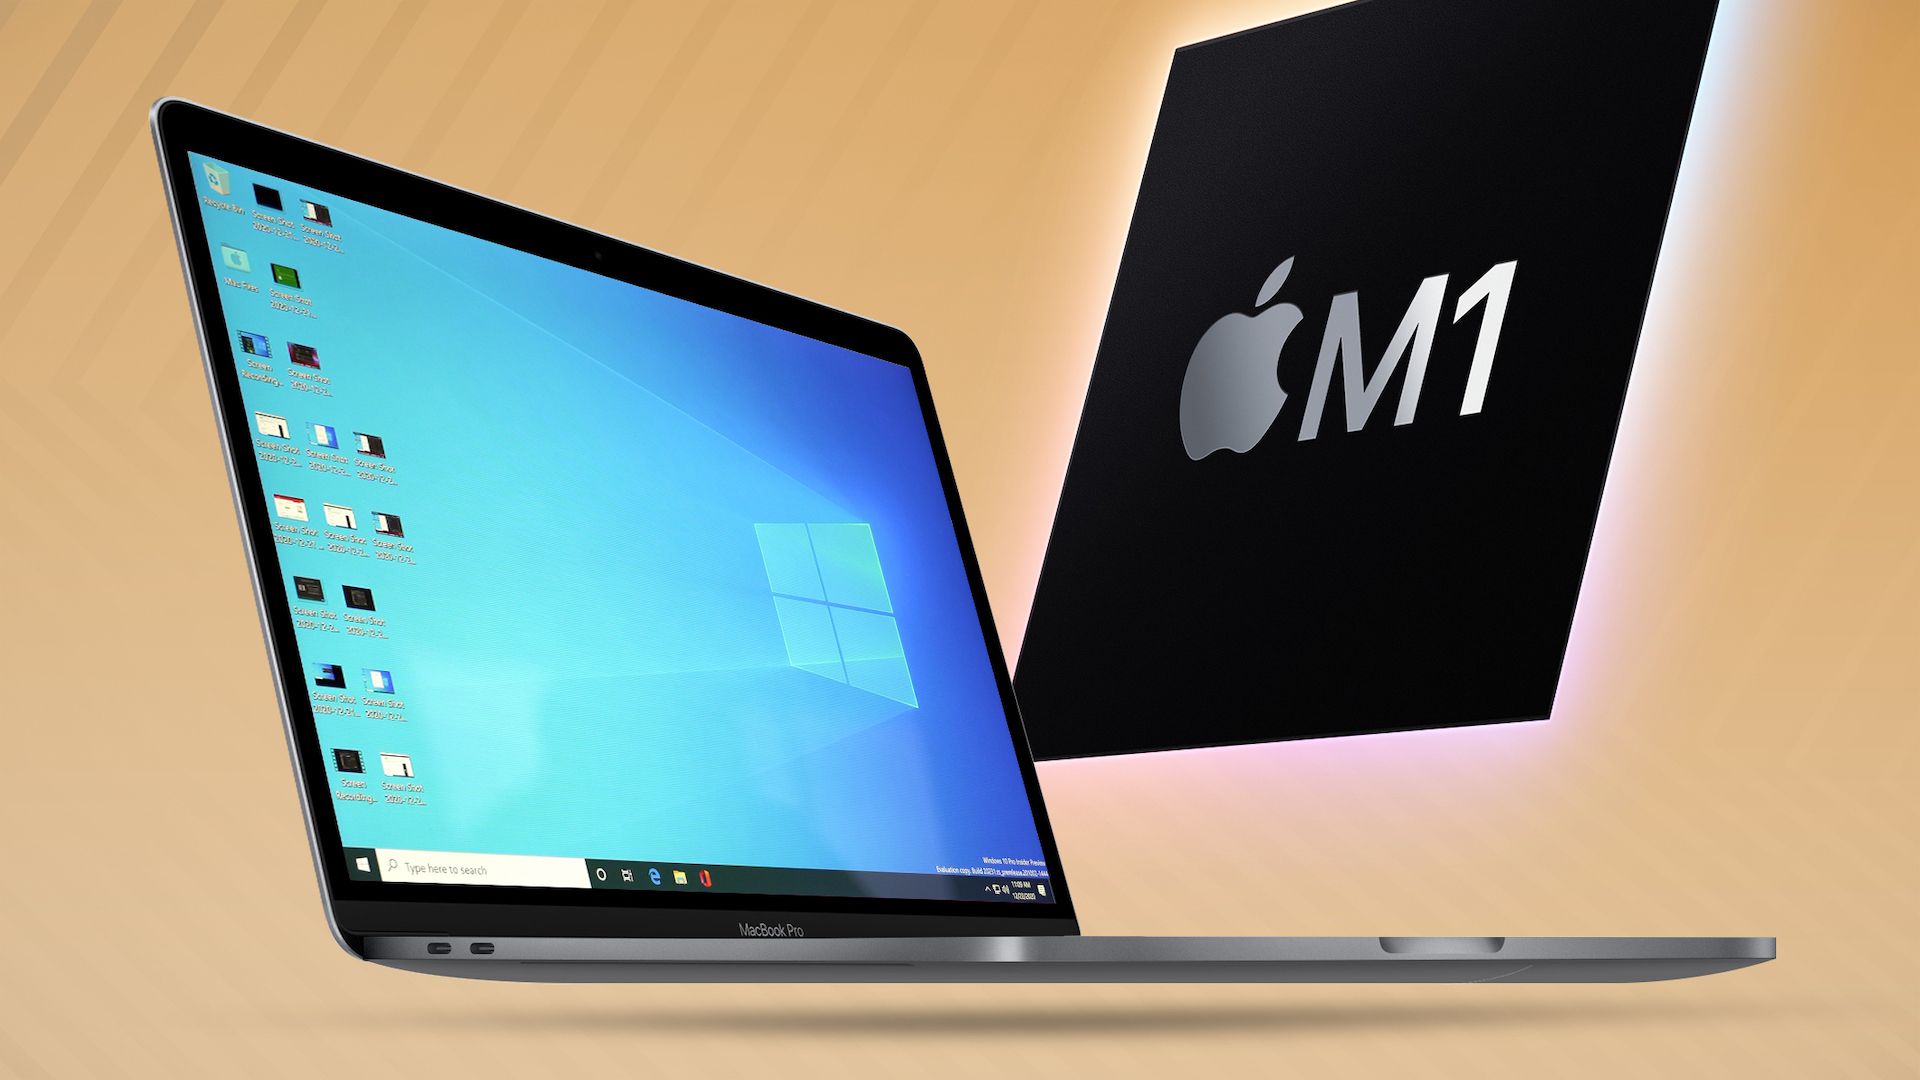 Video: Testing Windows on a Mac M1 with Parallels 16